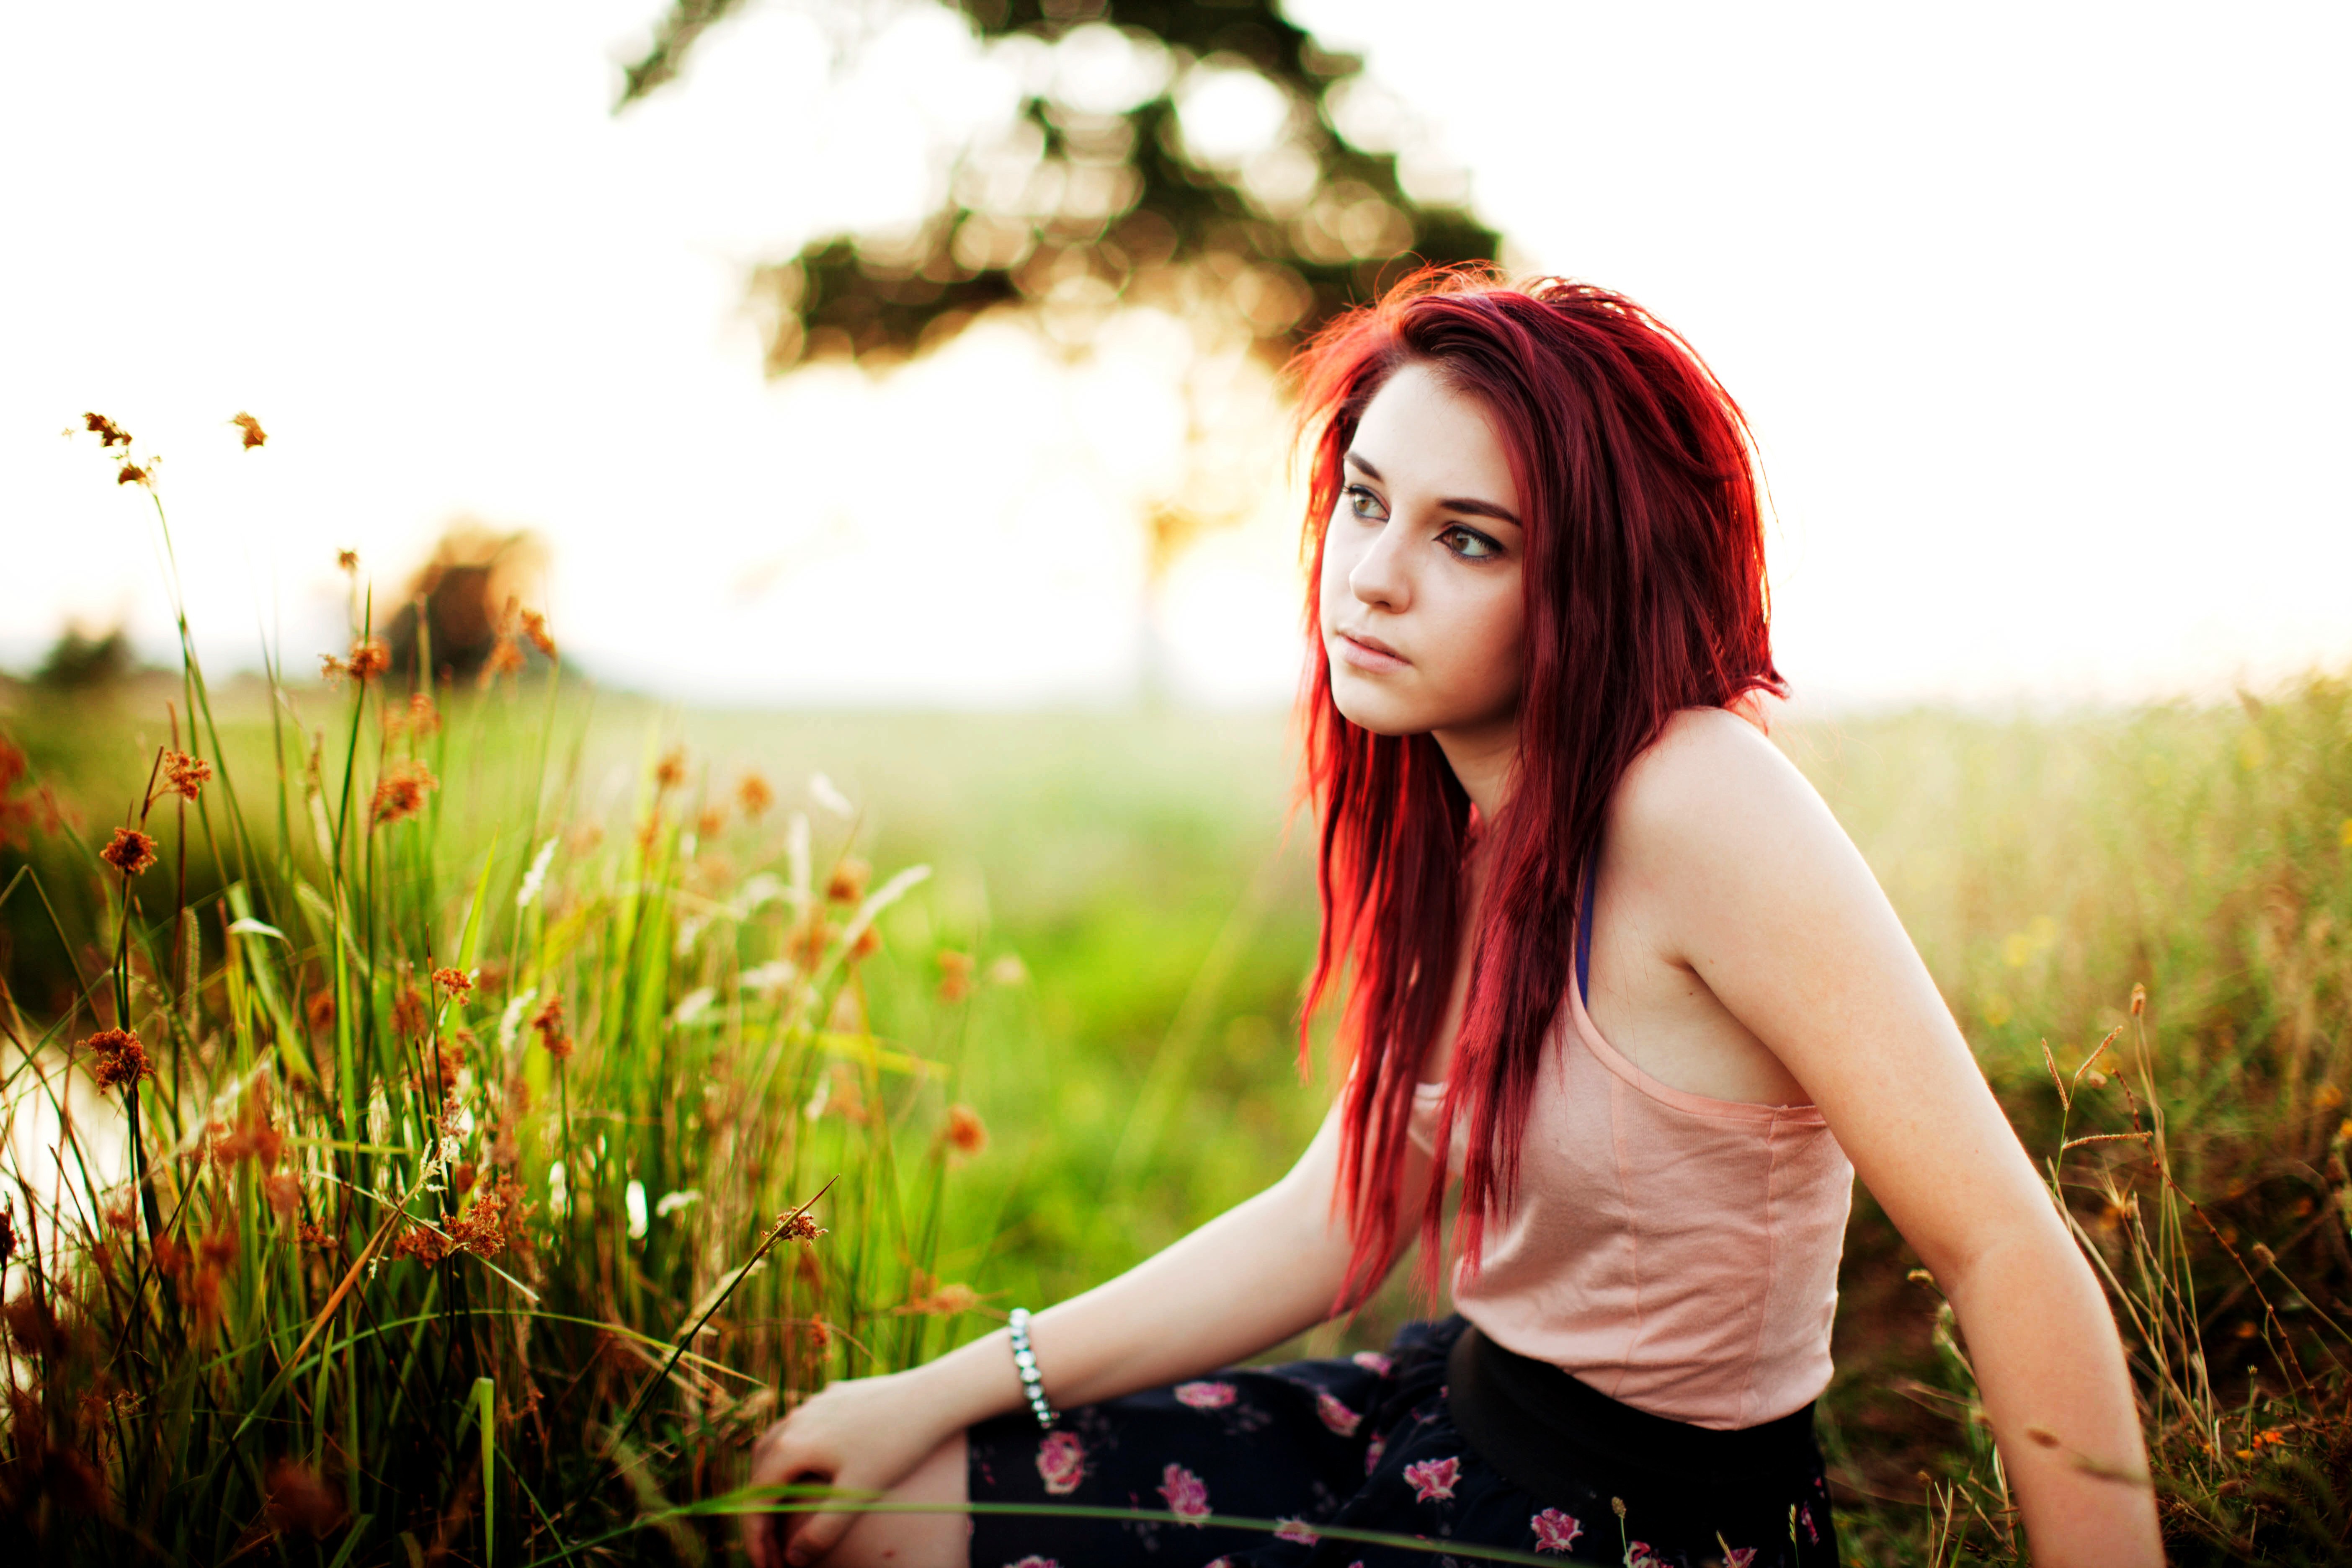 People 5616x3744 face women redhead grass Tosha McCarter women outdoors bokeh outdoors flowers plants looking into the distance dyed hair model sitting